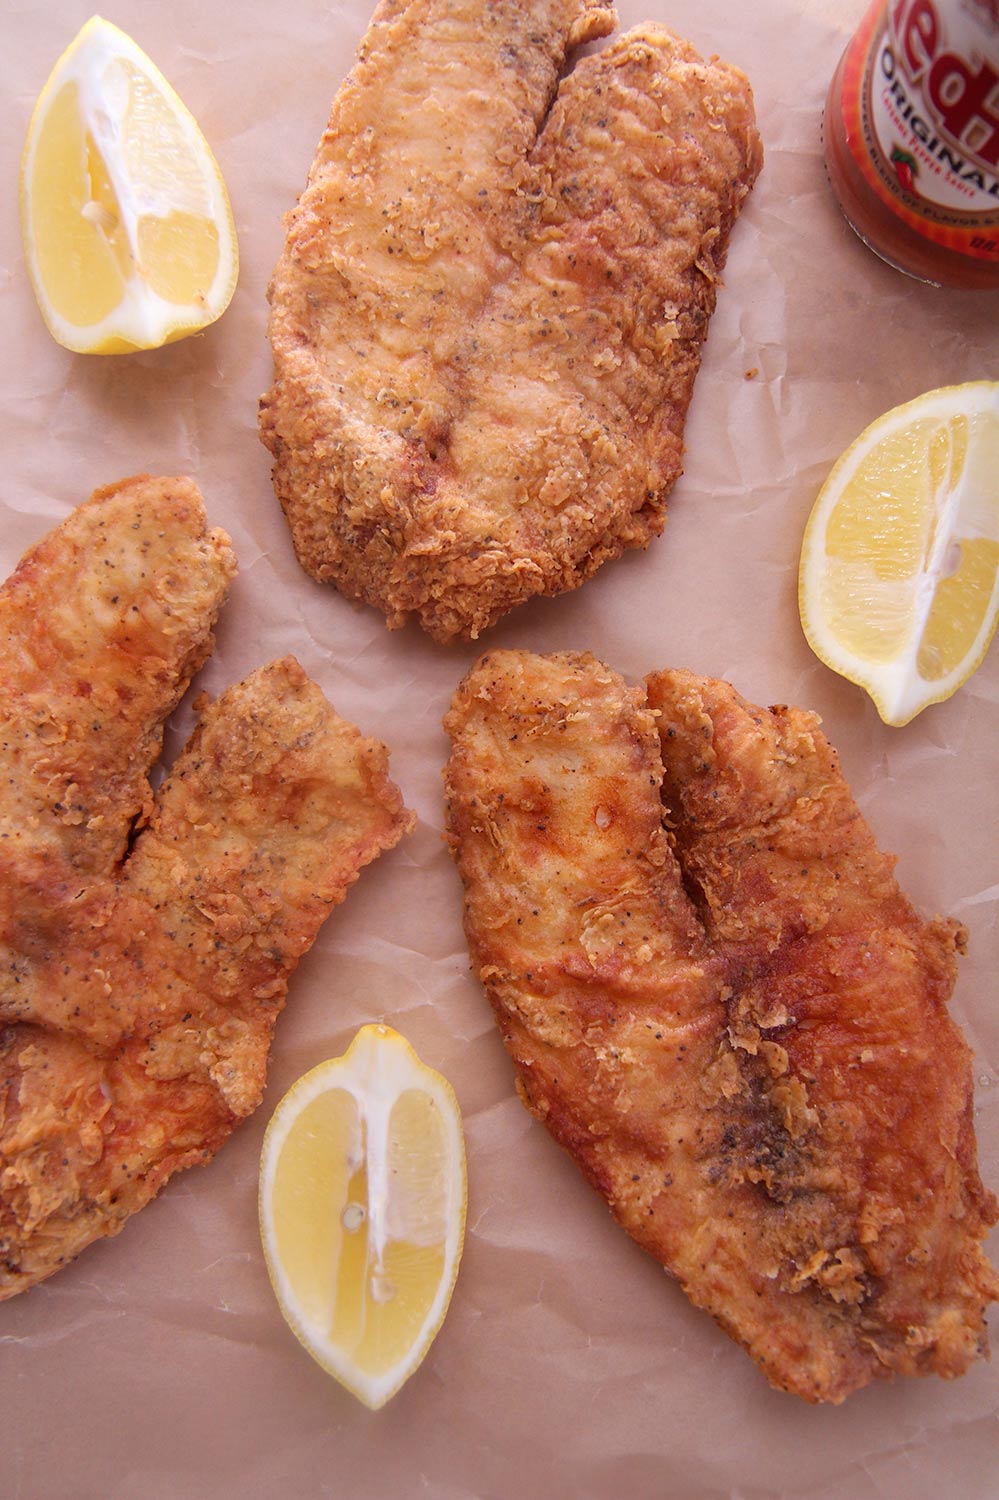 Fried Tilapia (flavorful and crunchy) + Video - Cooked by Julie